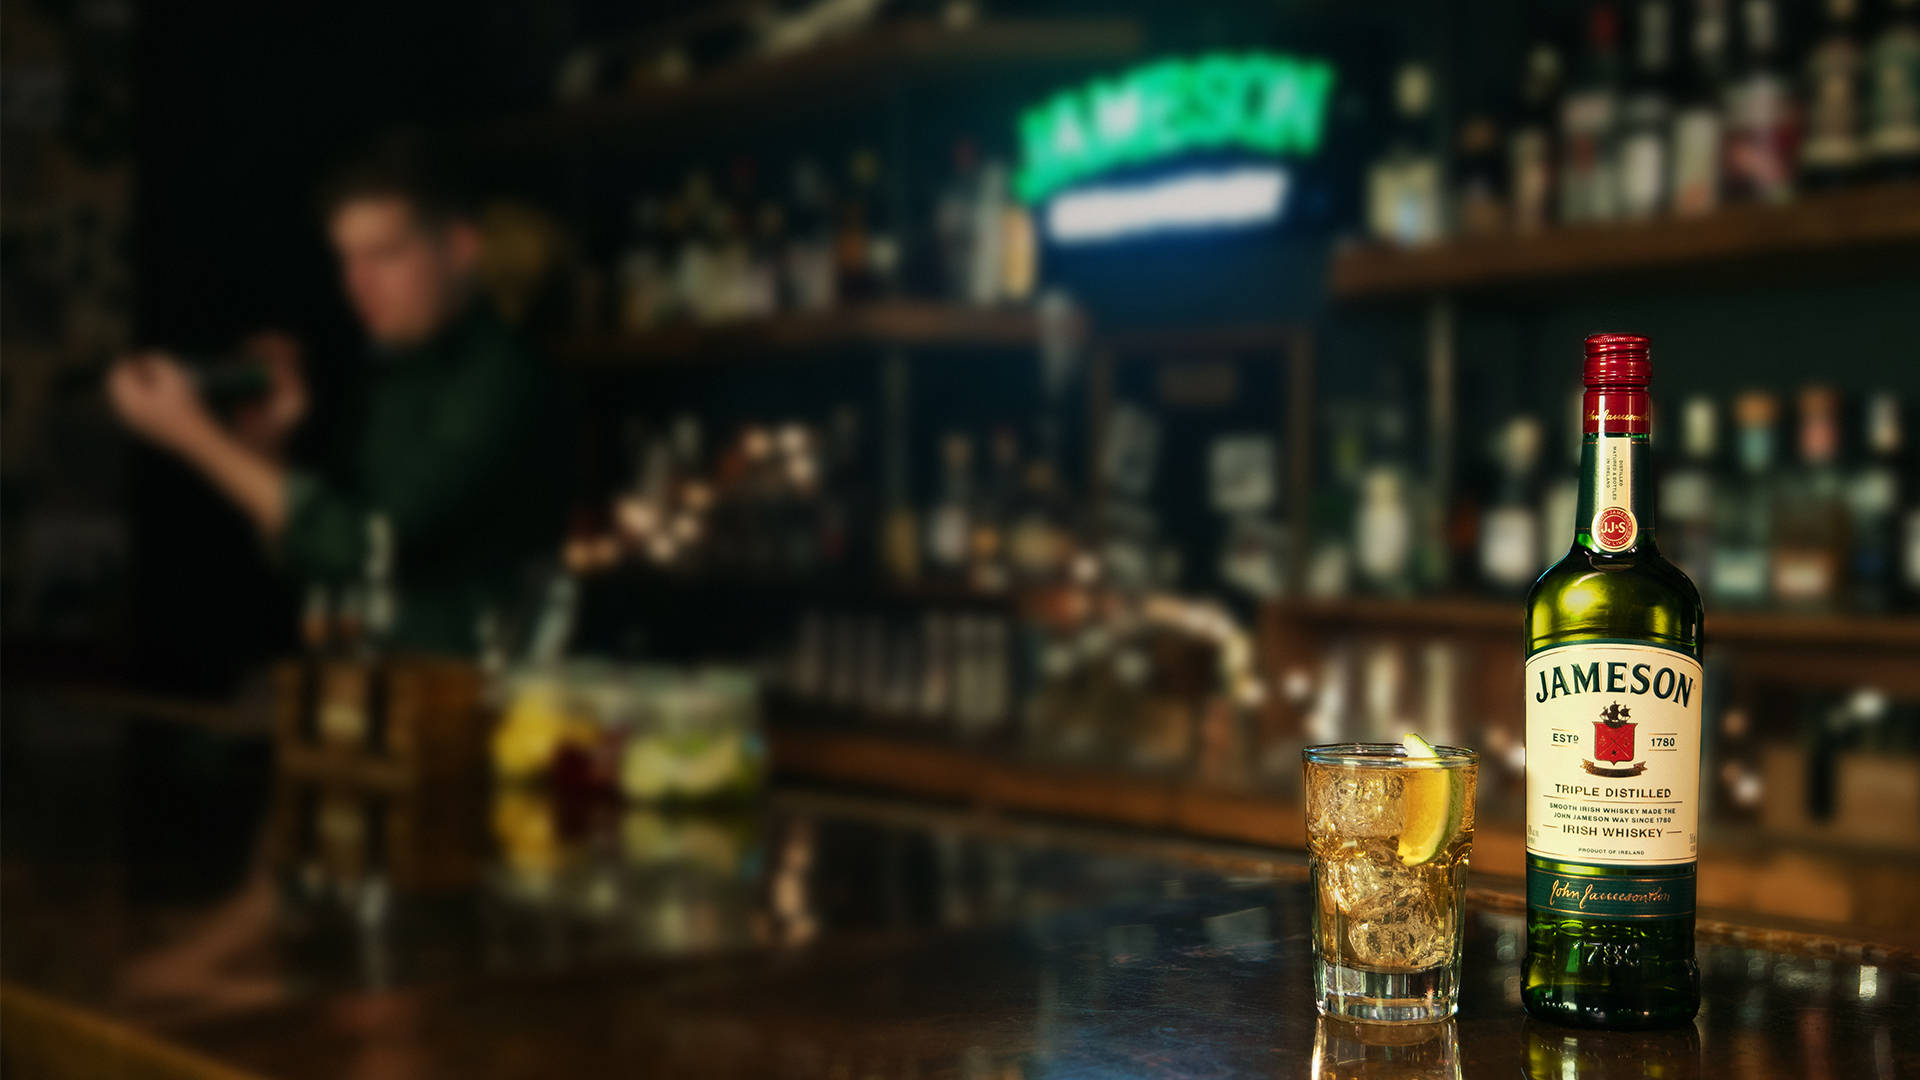 Jameson Bar And Drinks Background